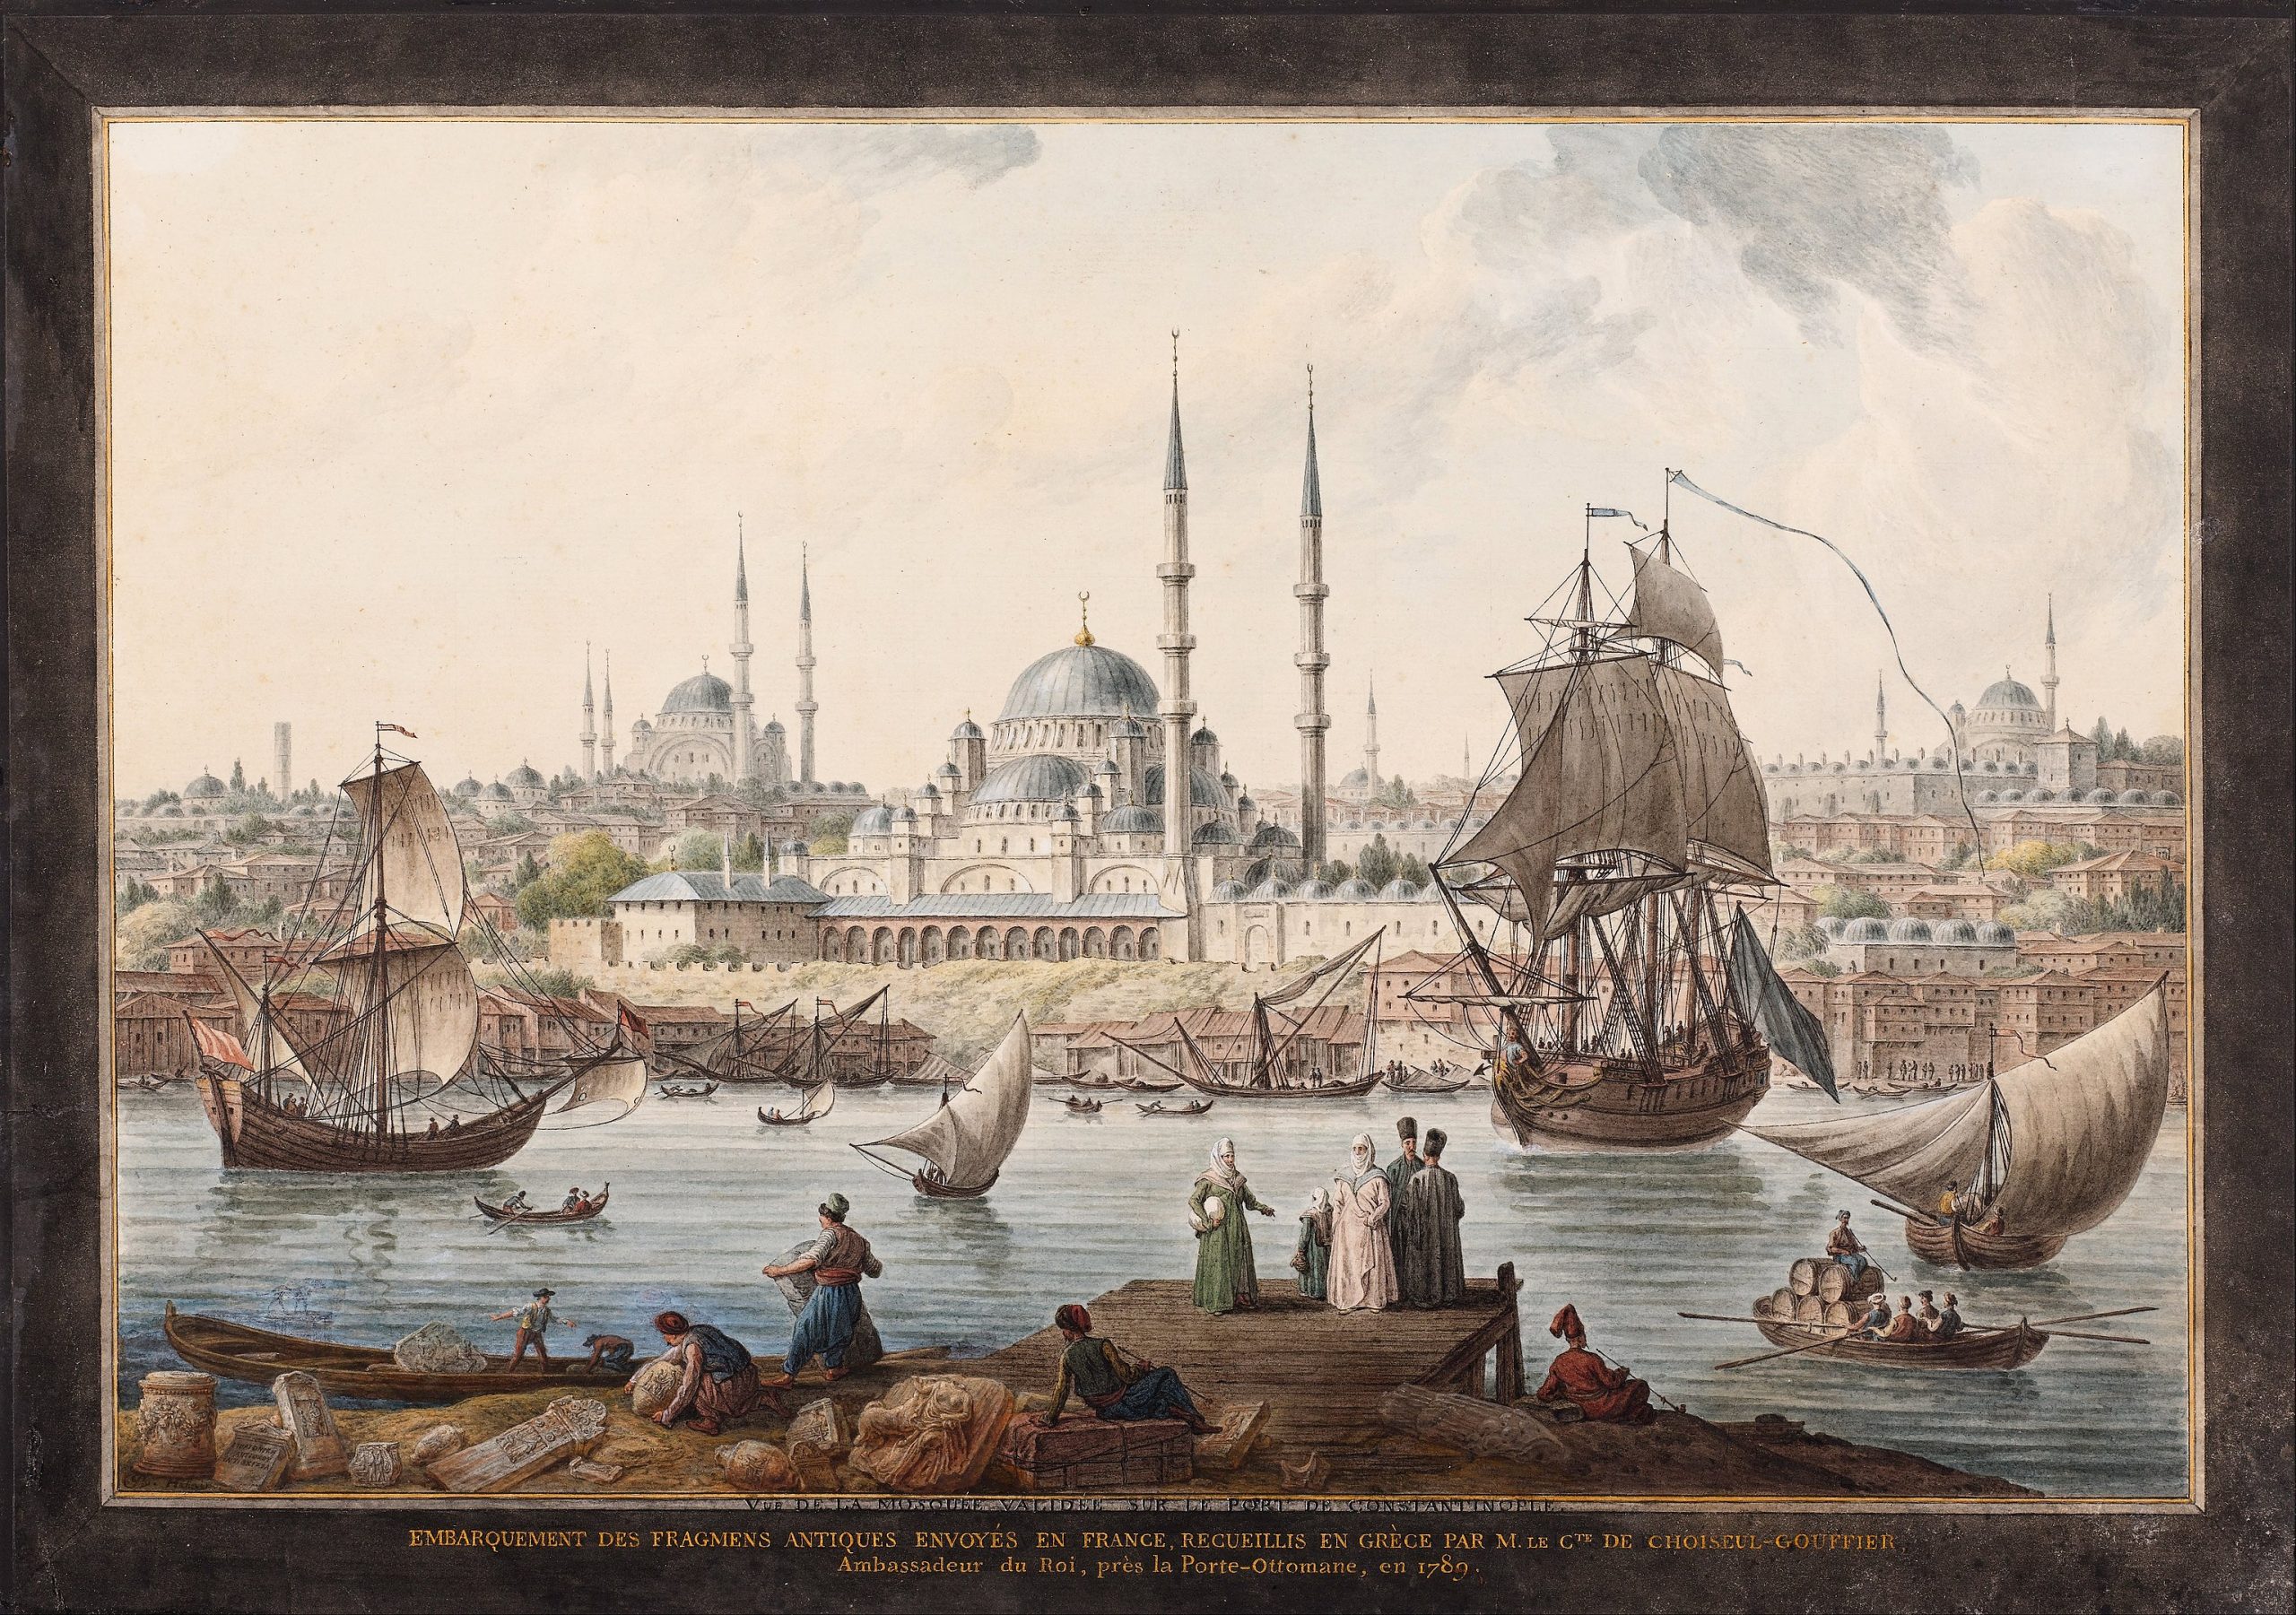 A landscape view of boats and ships gathered around a city's busy port